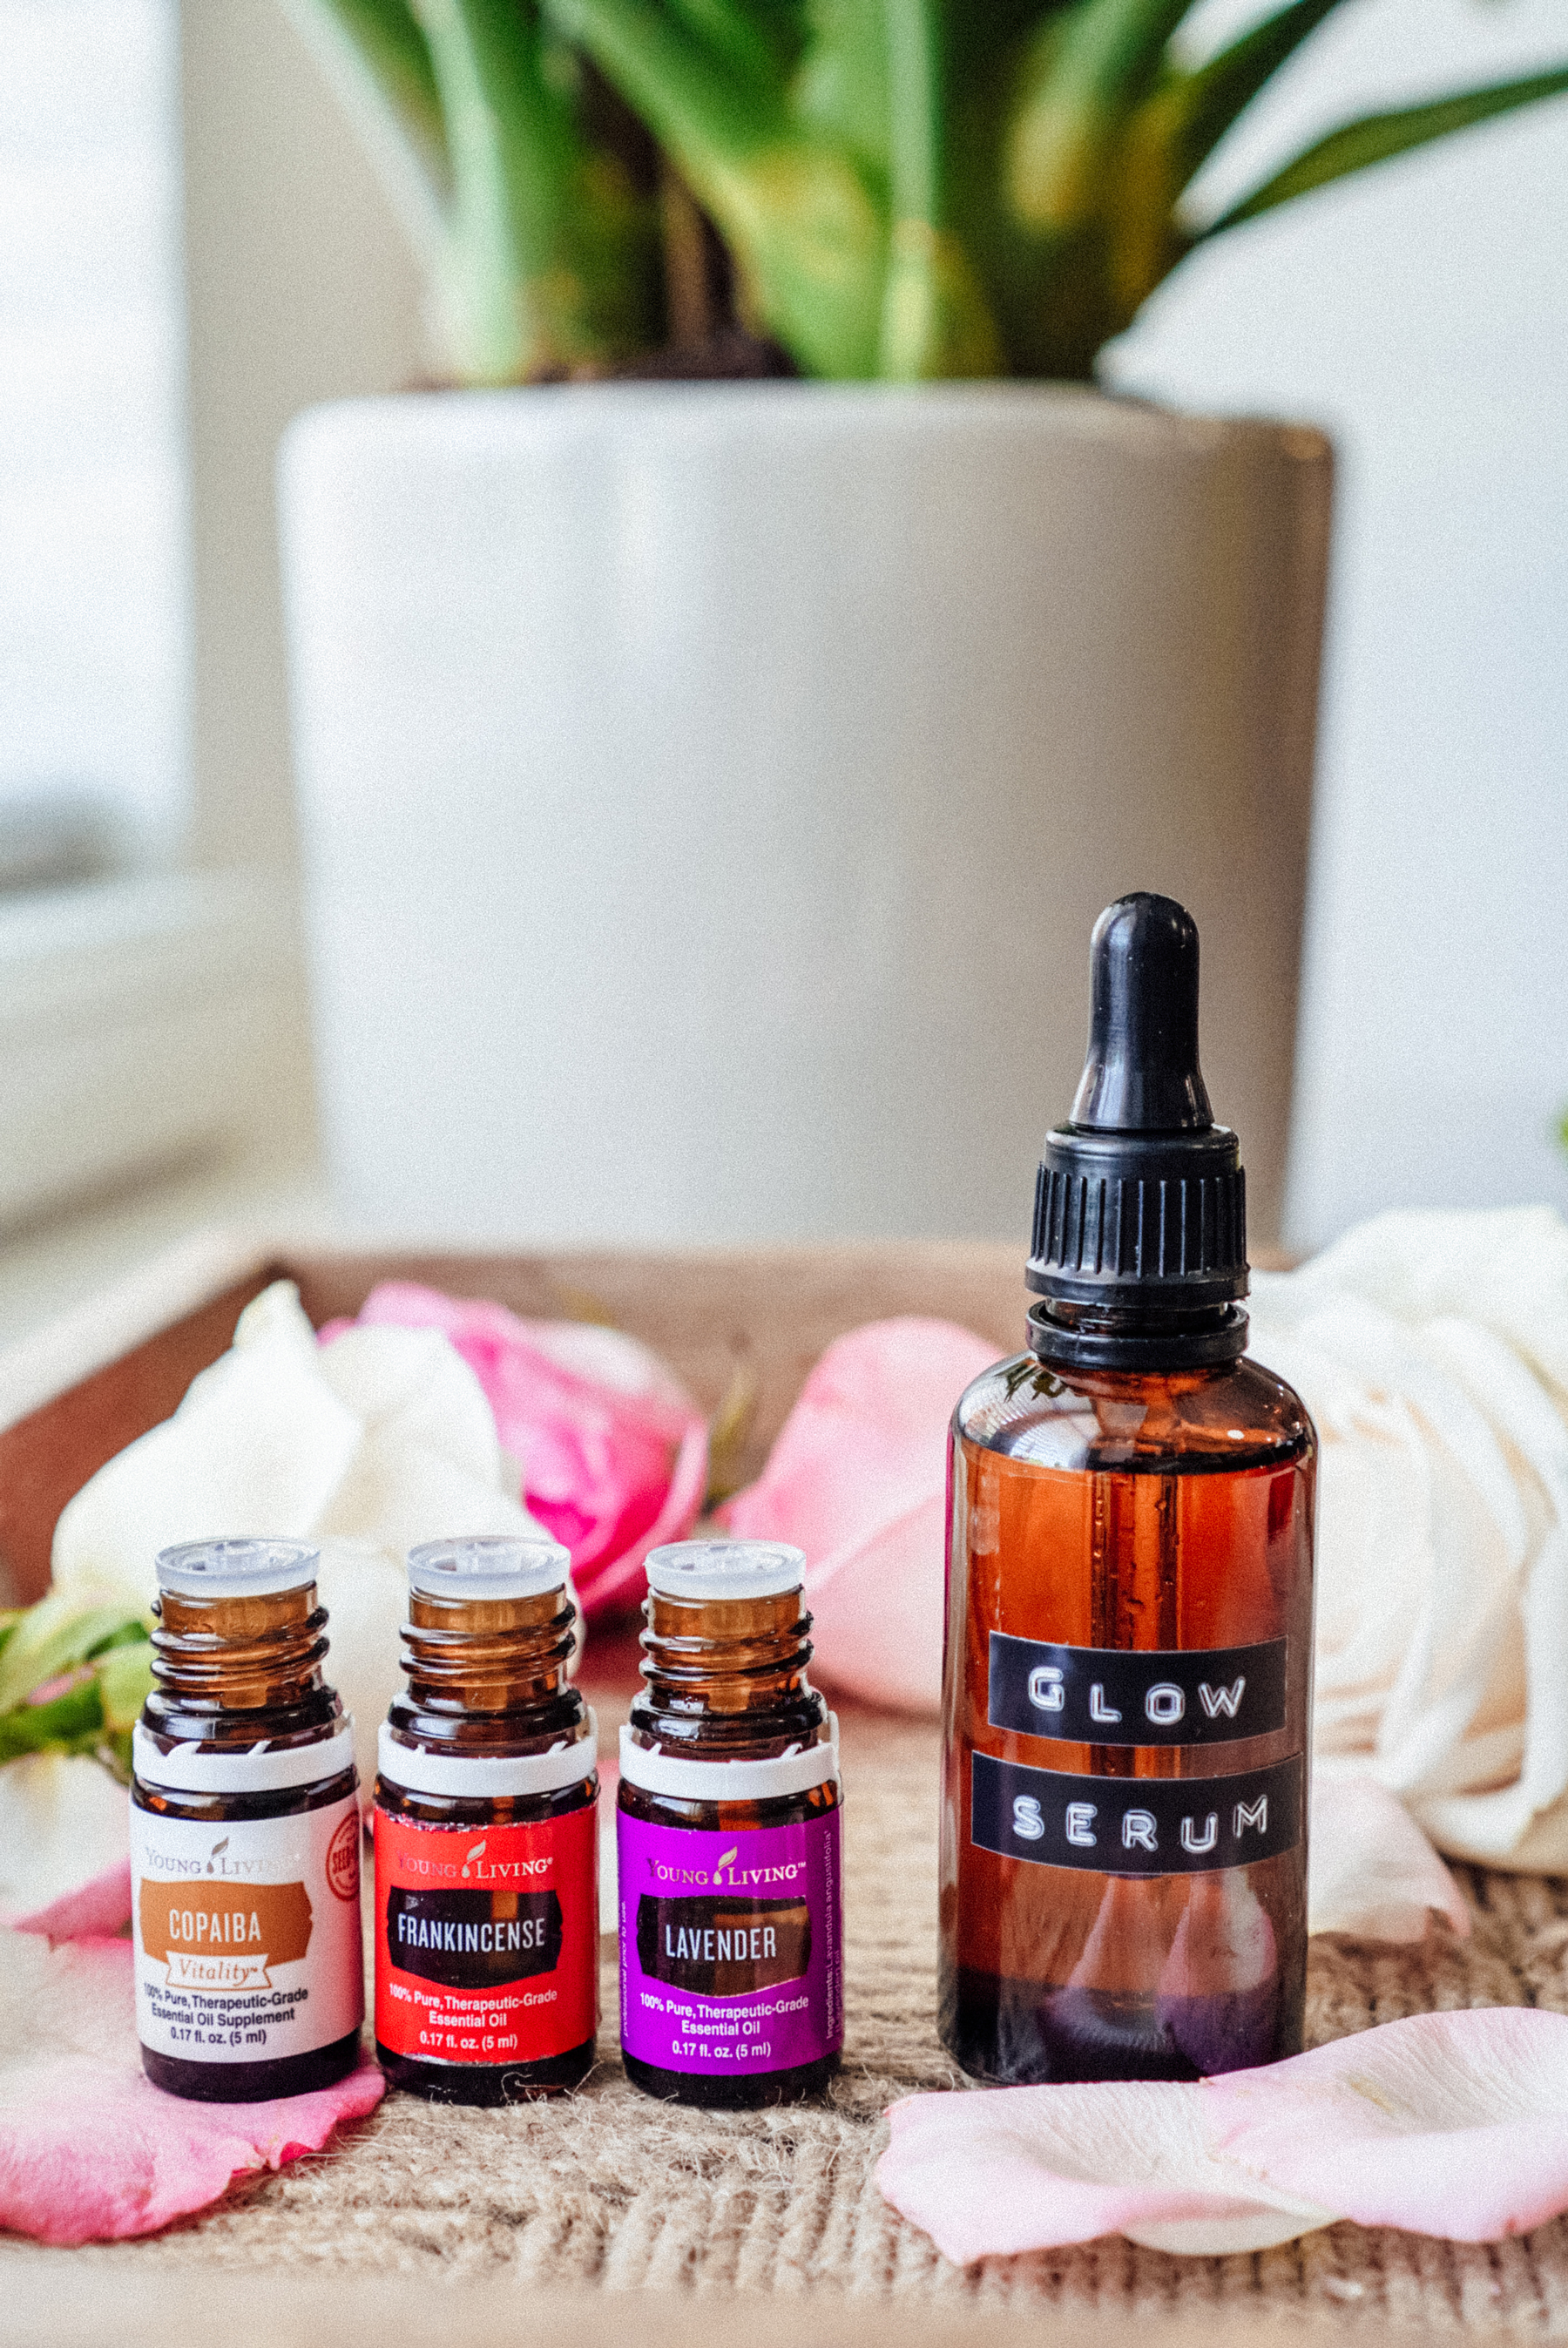 Needing to take better care of your skin? Look no further than my DIY essential oil glow serum. It's great for oily to dry to normal skin!